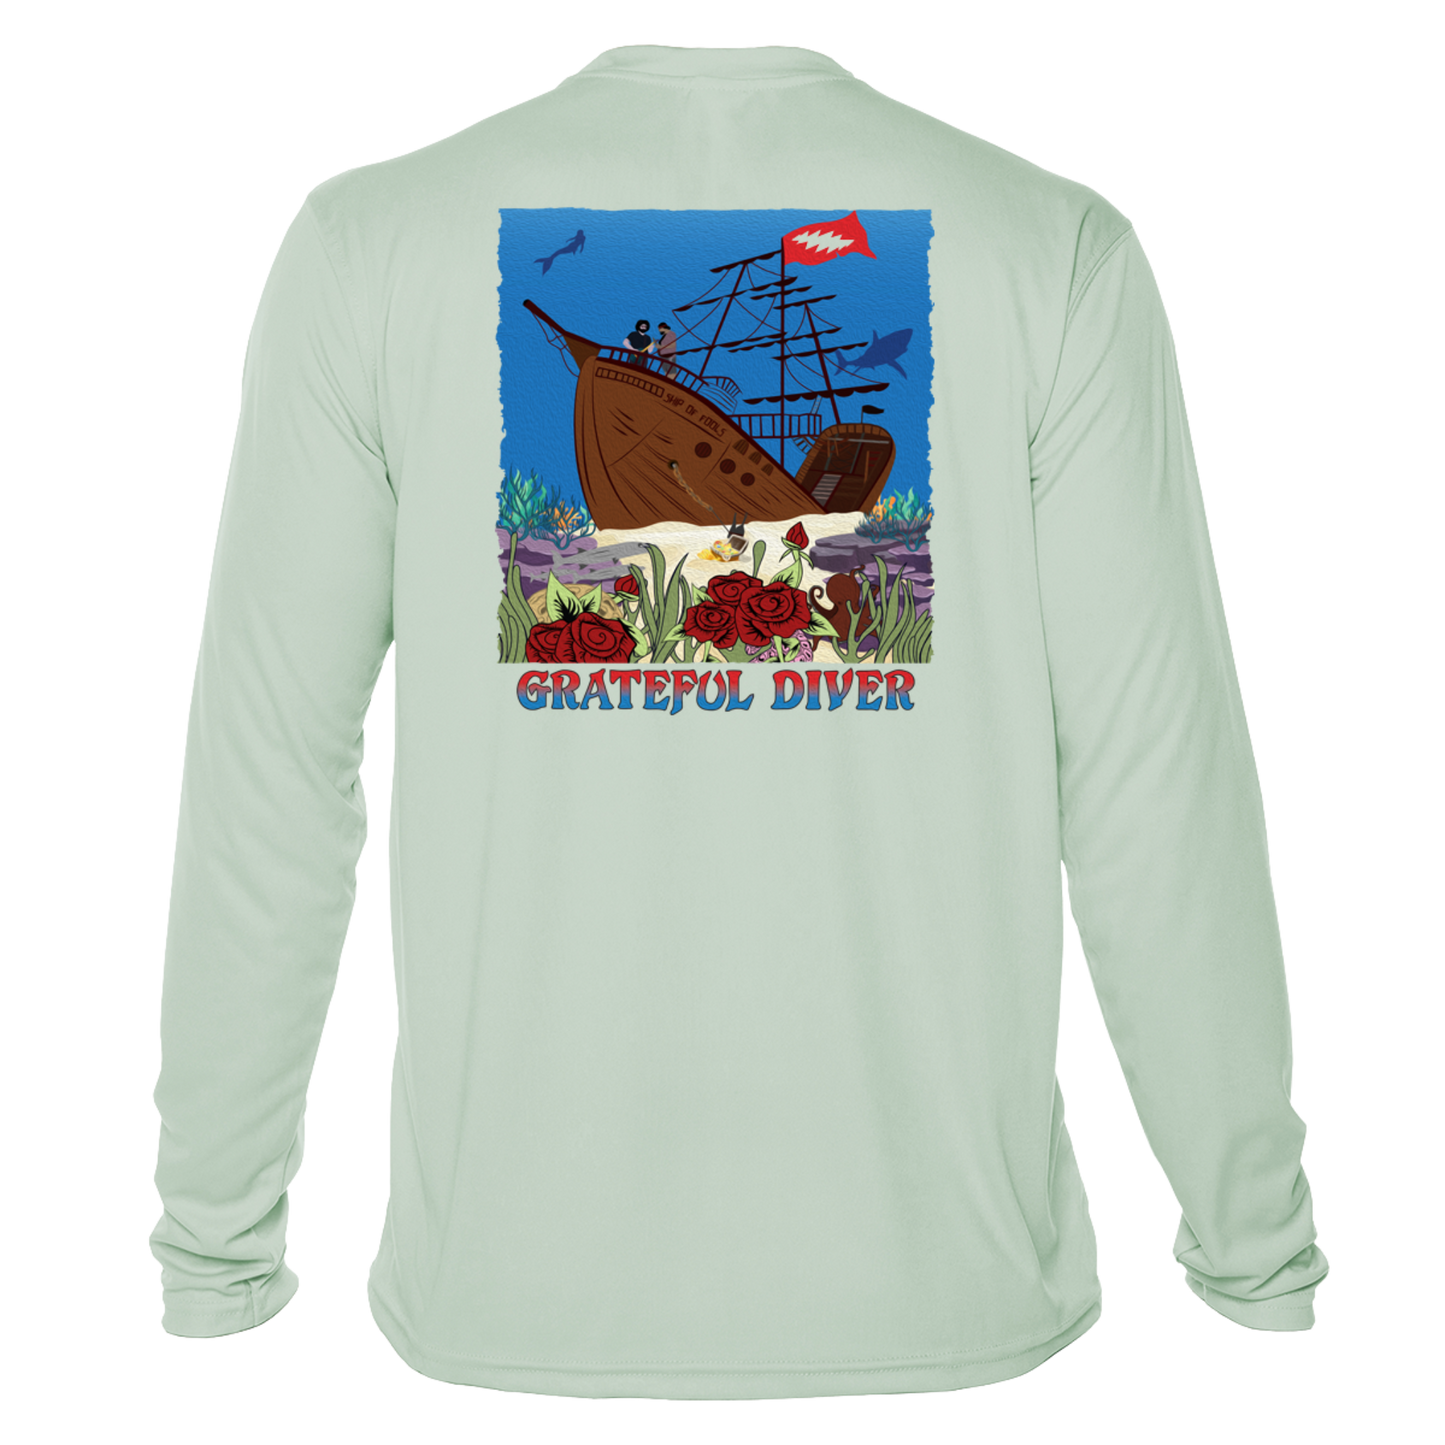 Grateful Diver Ship of Fools UV Shirt in seagrass showing the back graphic